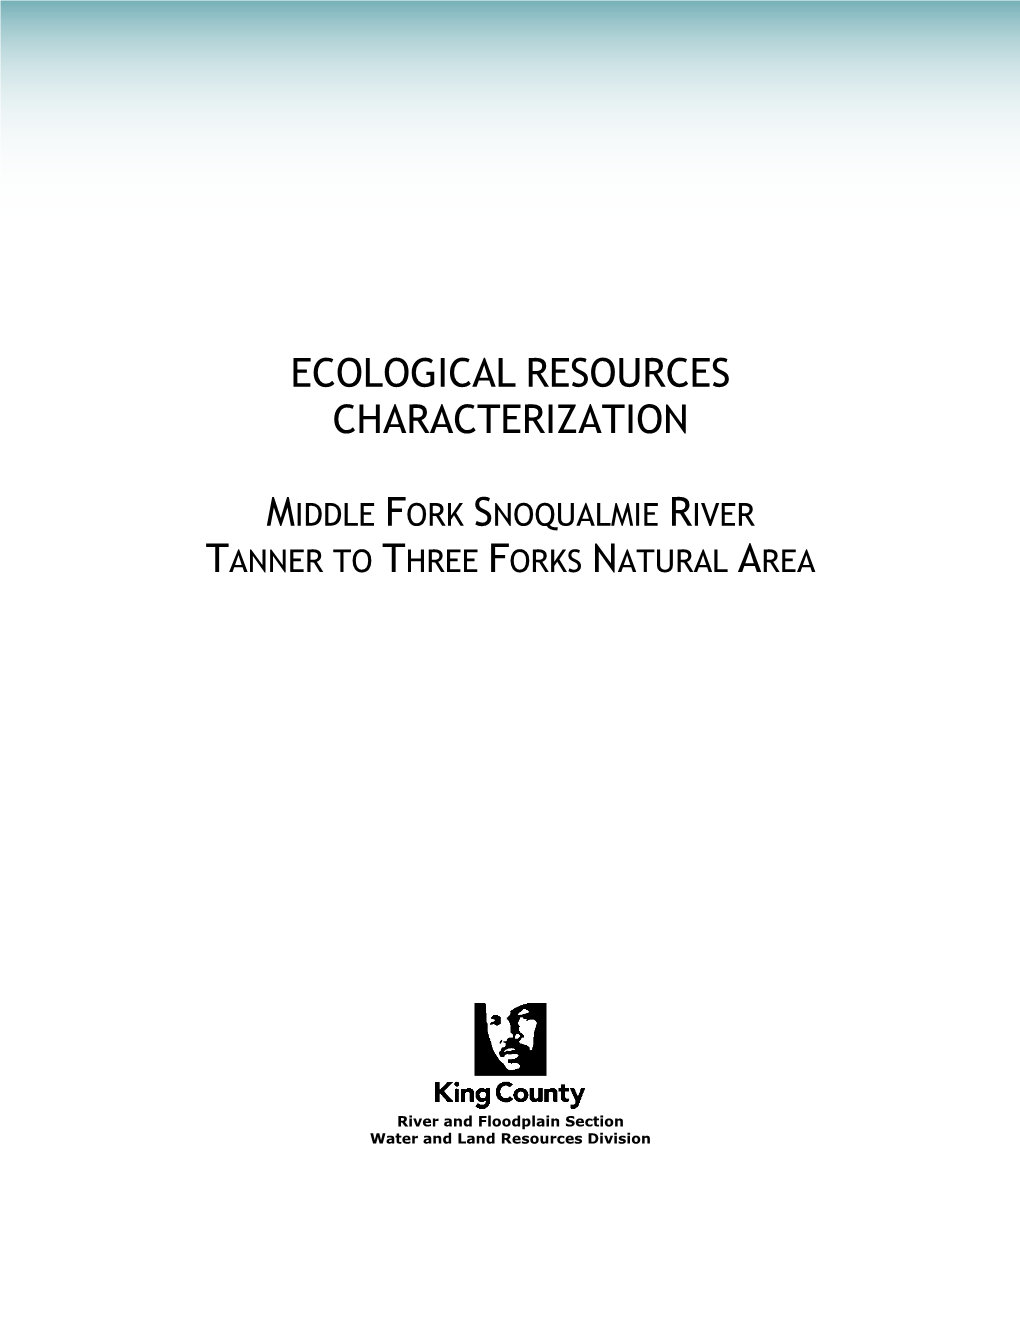 Ecological Resources Characterization Middle Fork Snoqualmie River Tanner